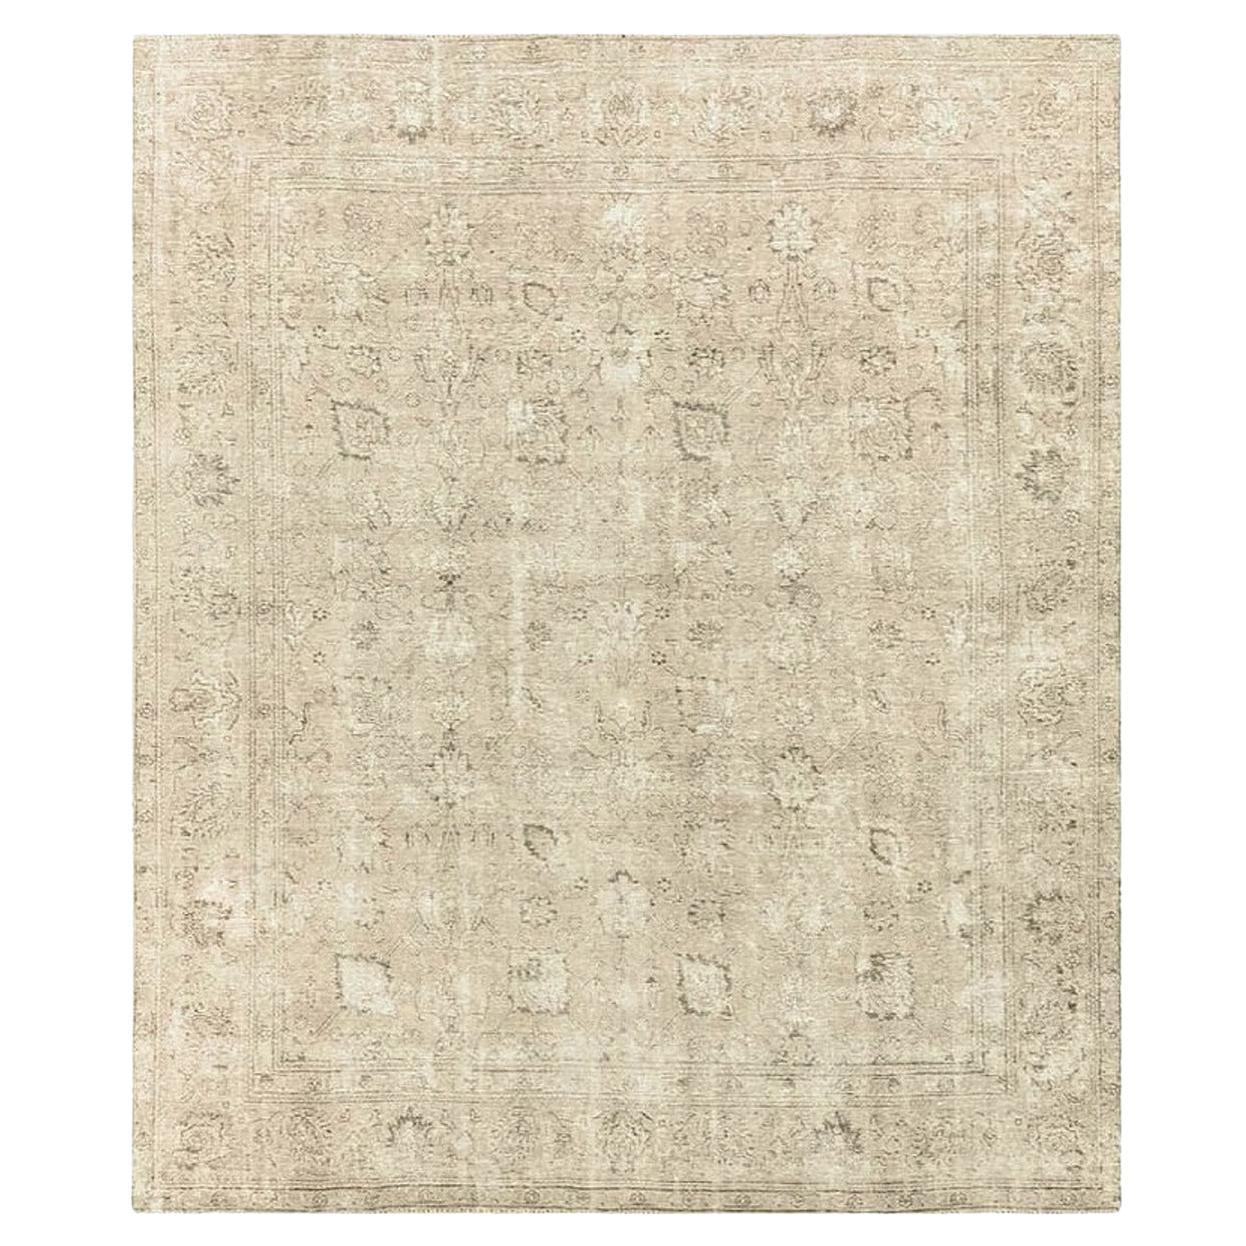 Vintage Muted Rug Classic Rug Gray Beige Brown Hand Knotted Neutral Tabriz